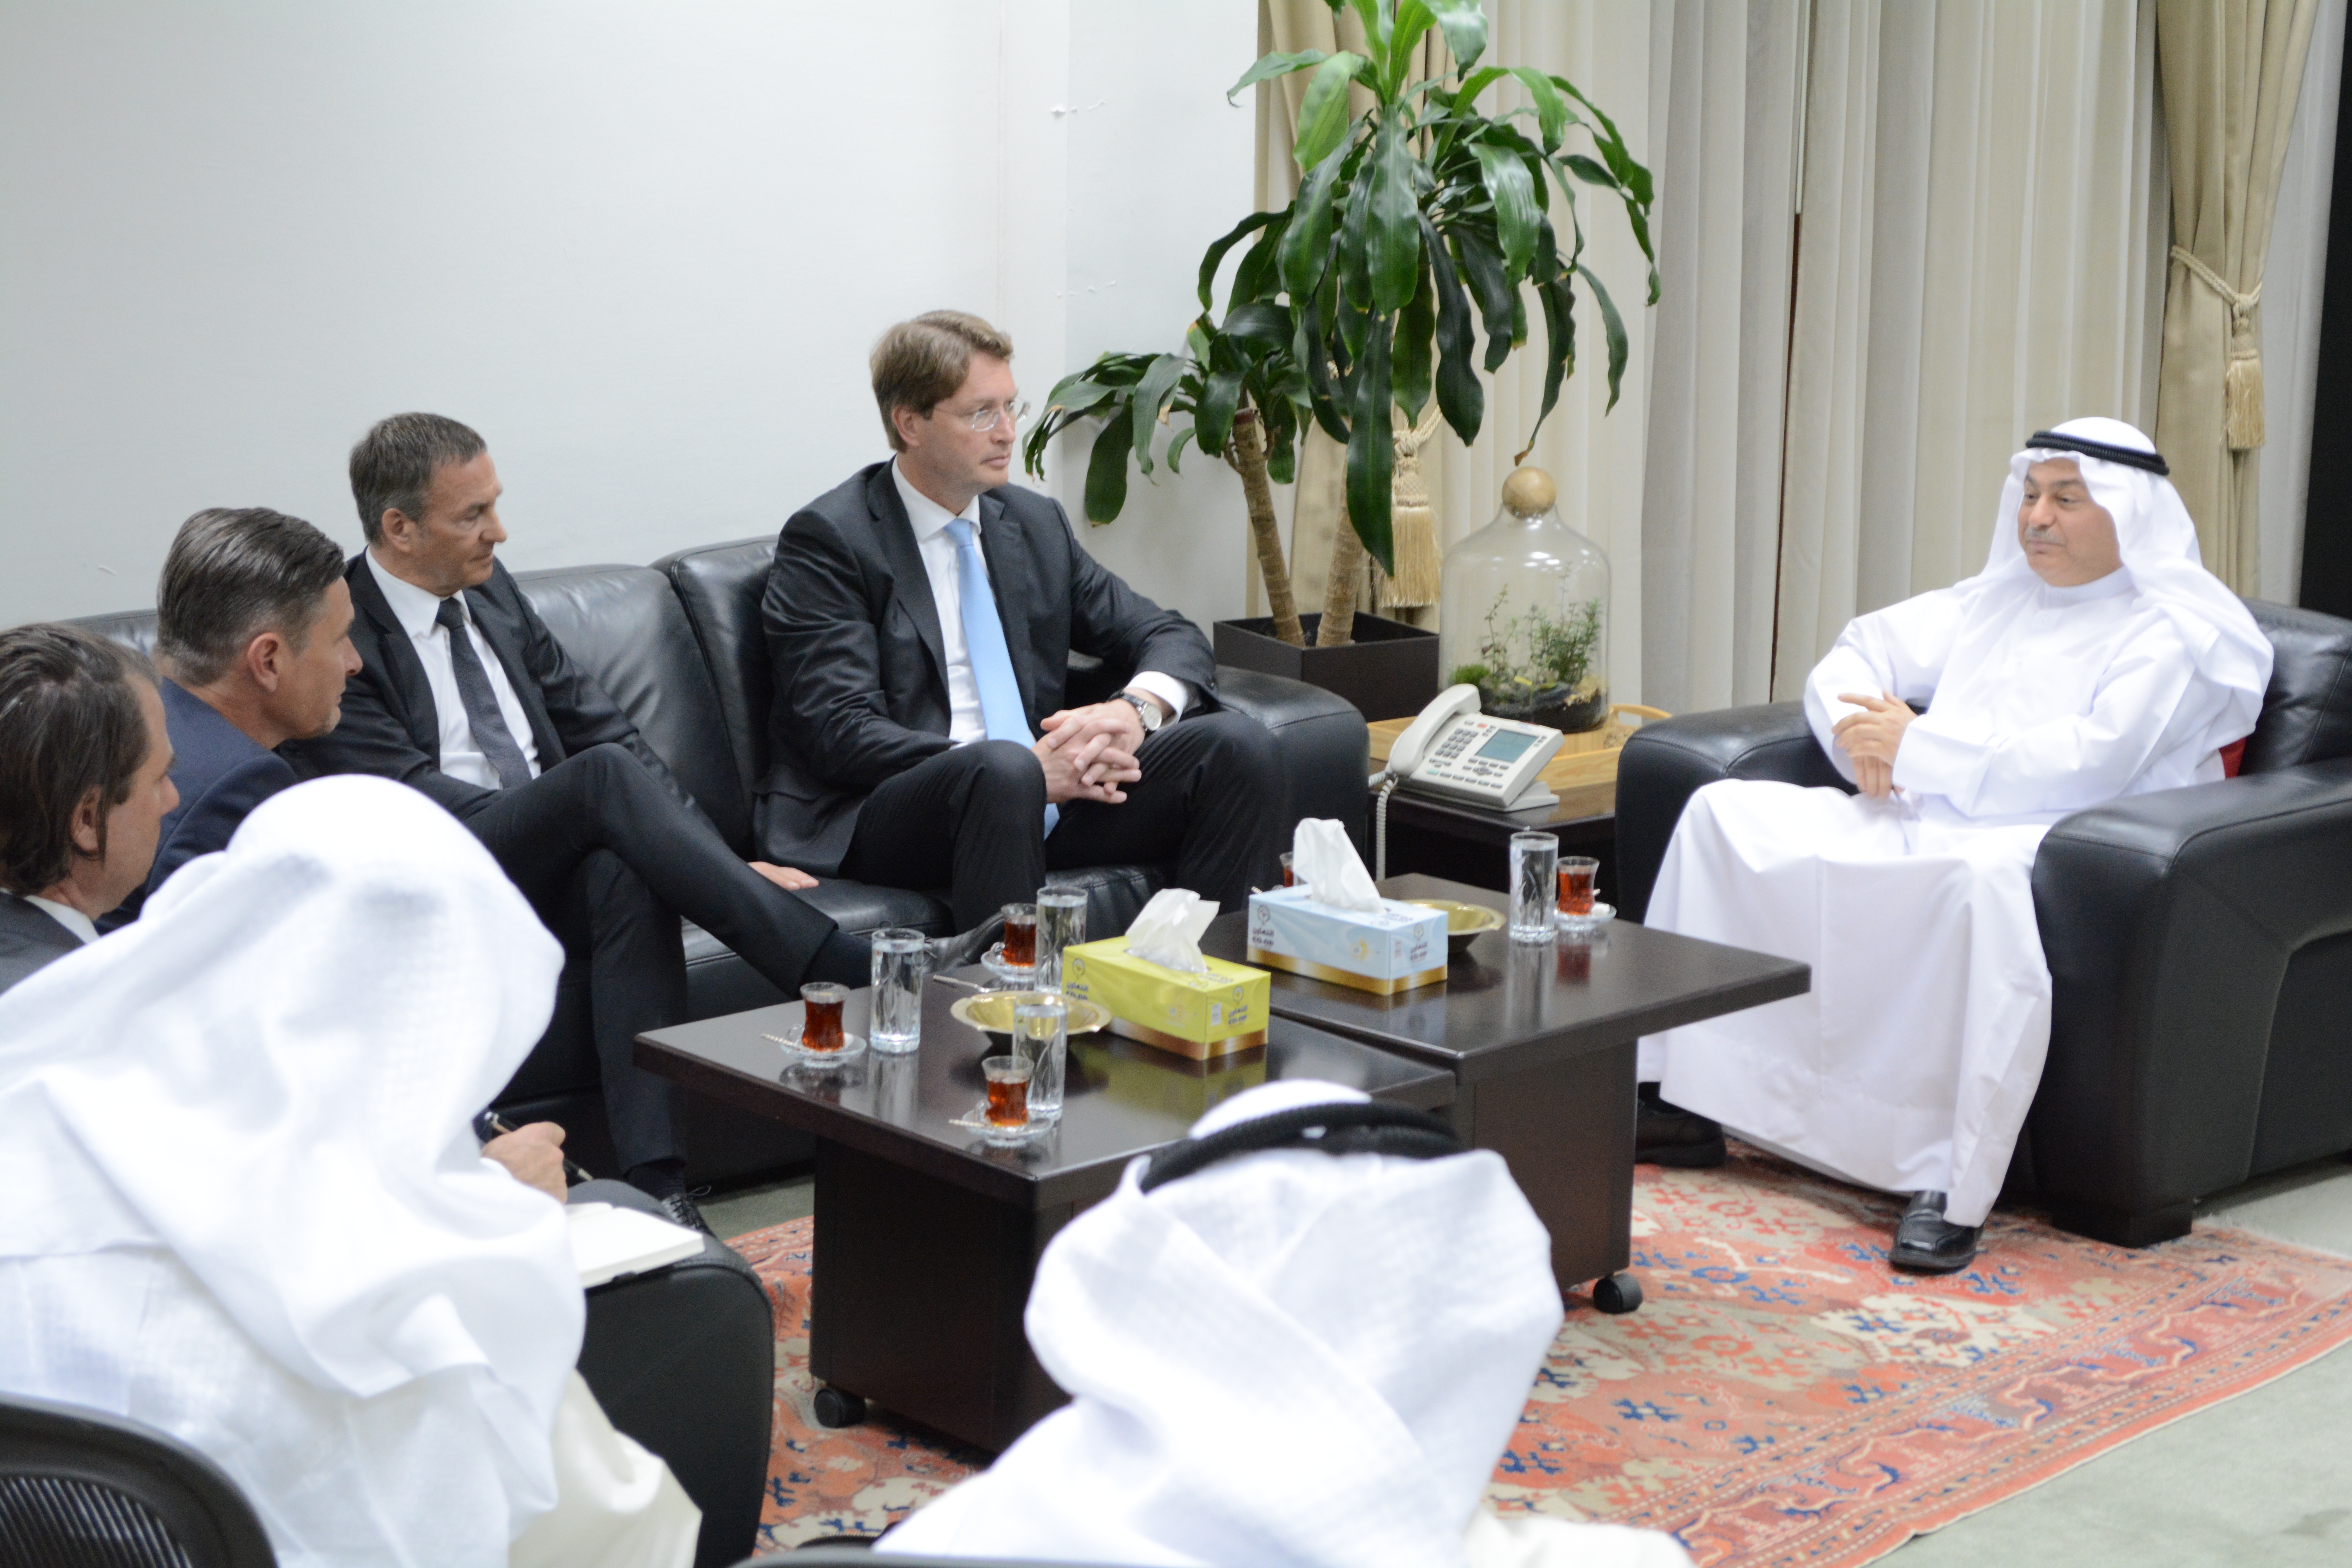 The Managing Director received the newly appointed CEO of Daimler